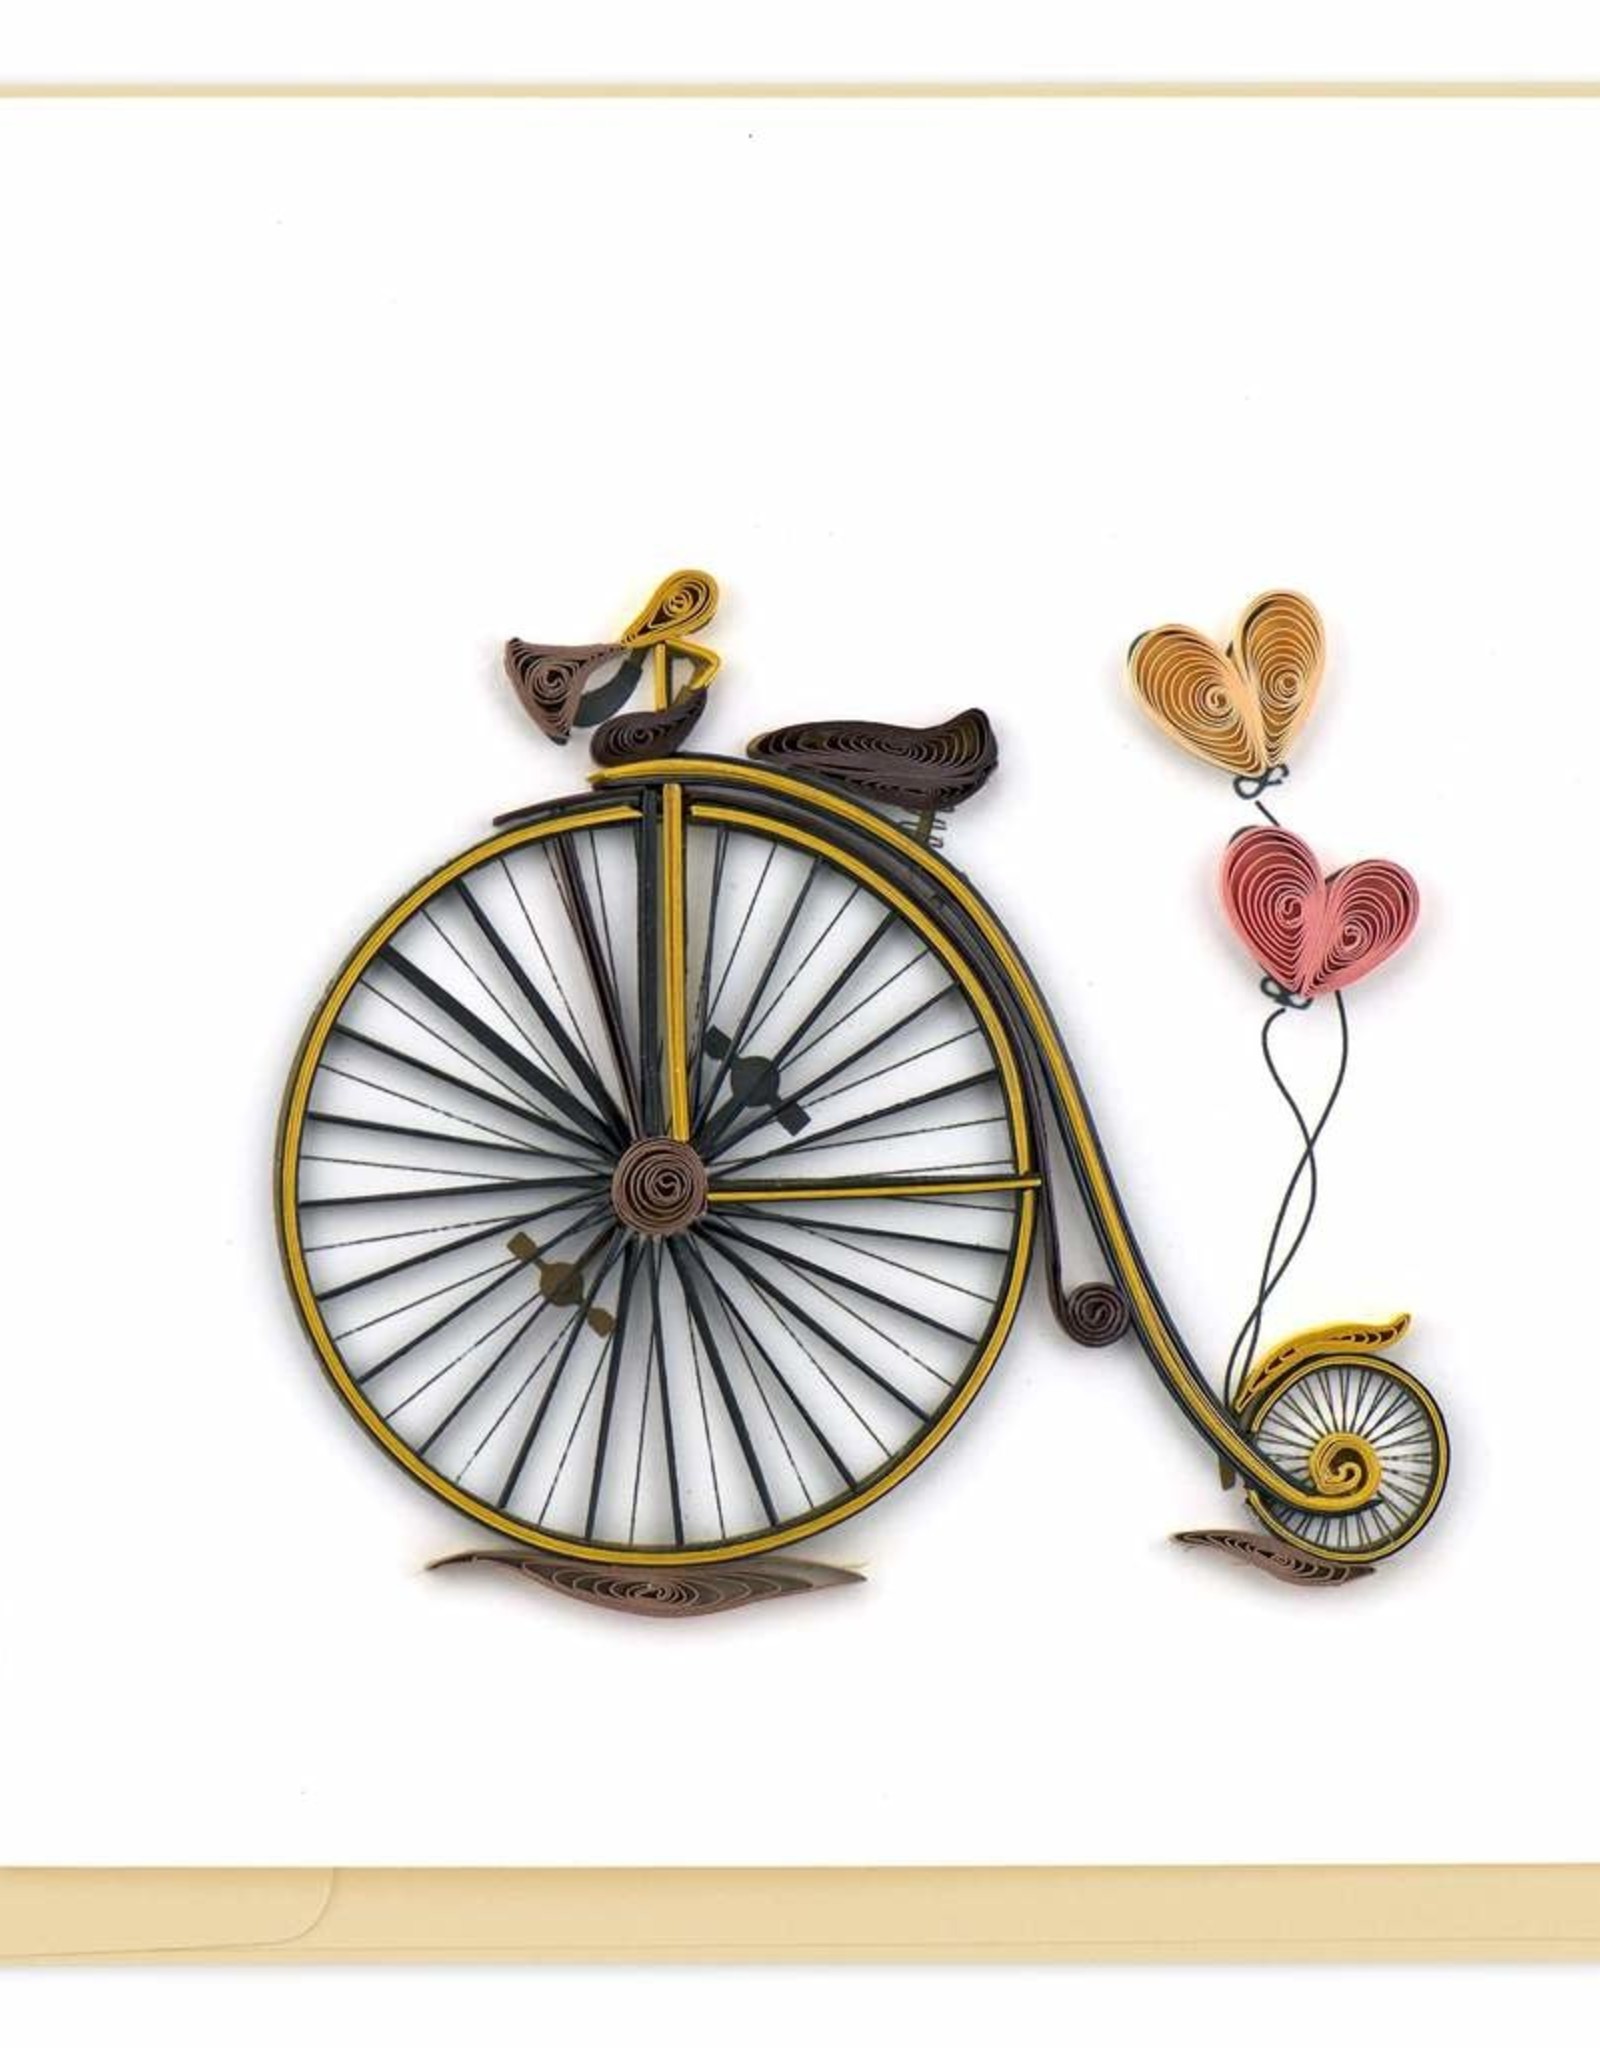 Quilling Card Quilled Vintage Bicycle Card